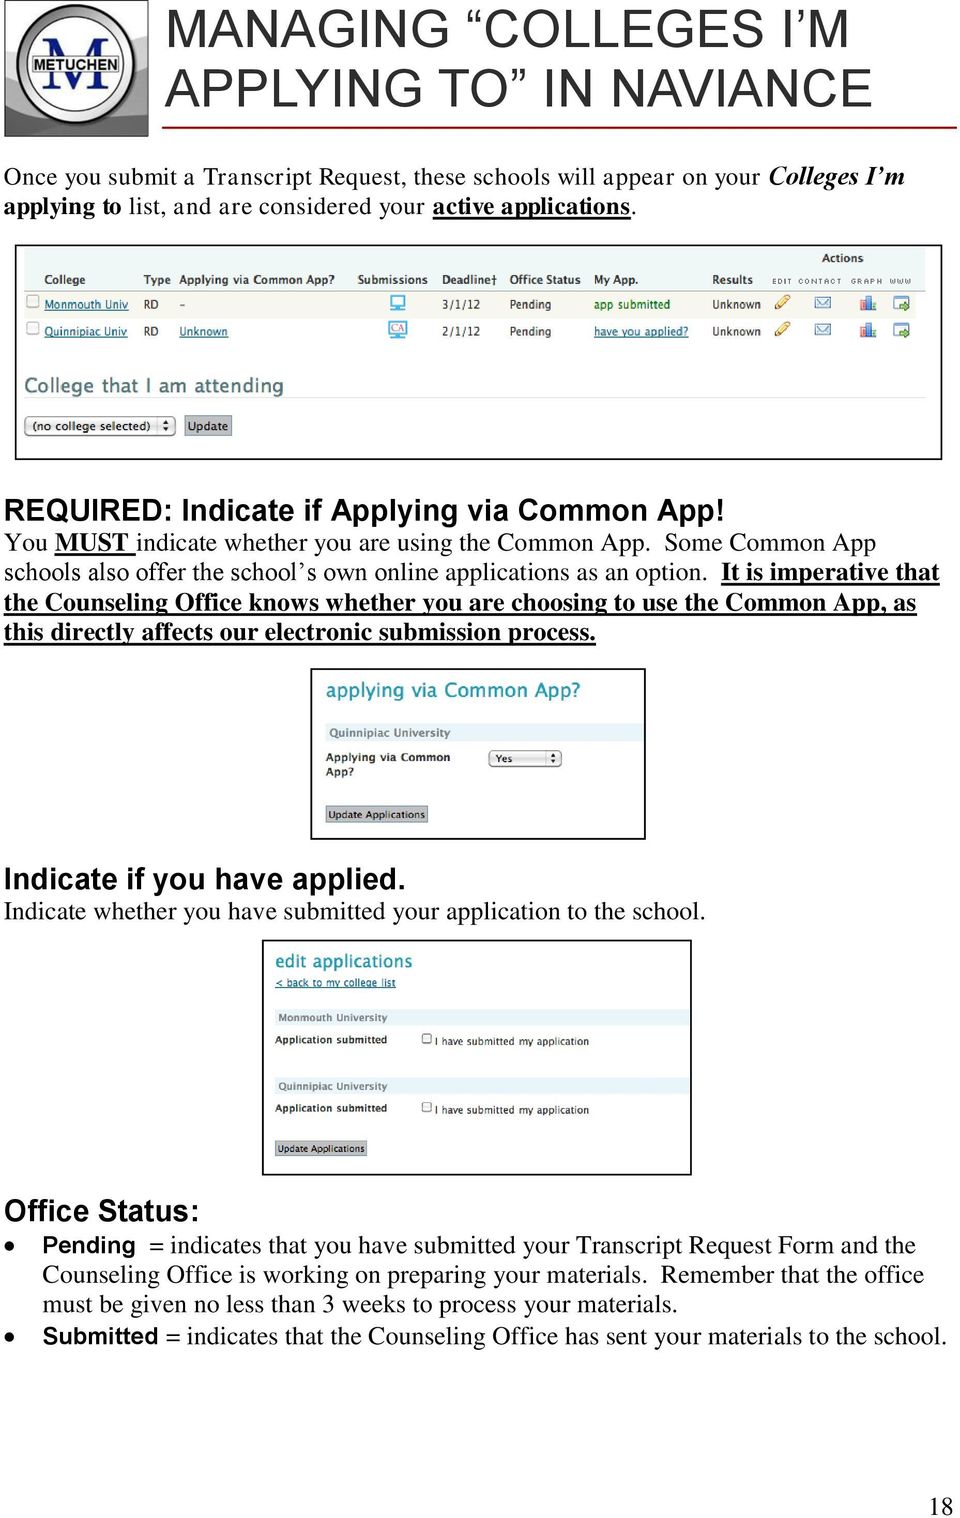 It is imperative that the Counseling Office knows whether you are choosing to use the Common App, as this directly affects our electronic submission process. Indicate if you have applied.